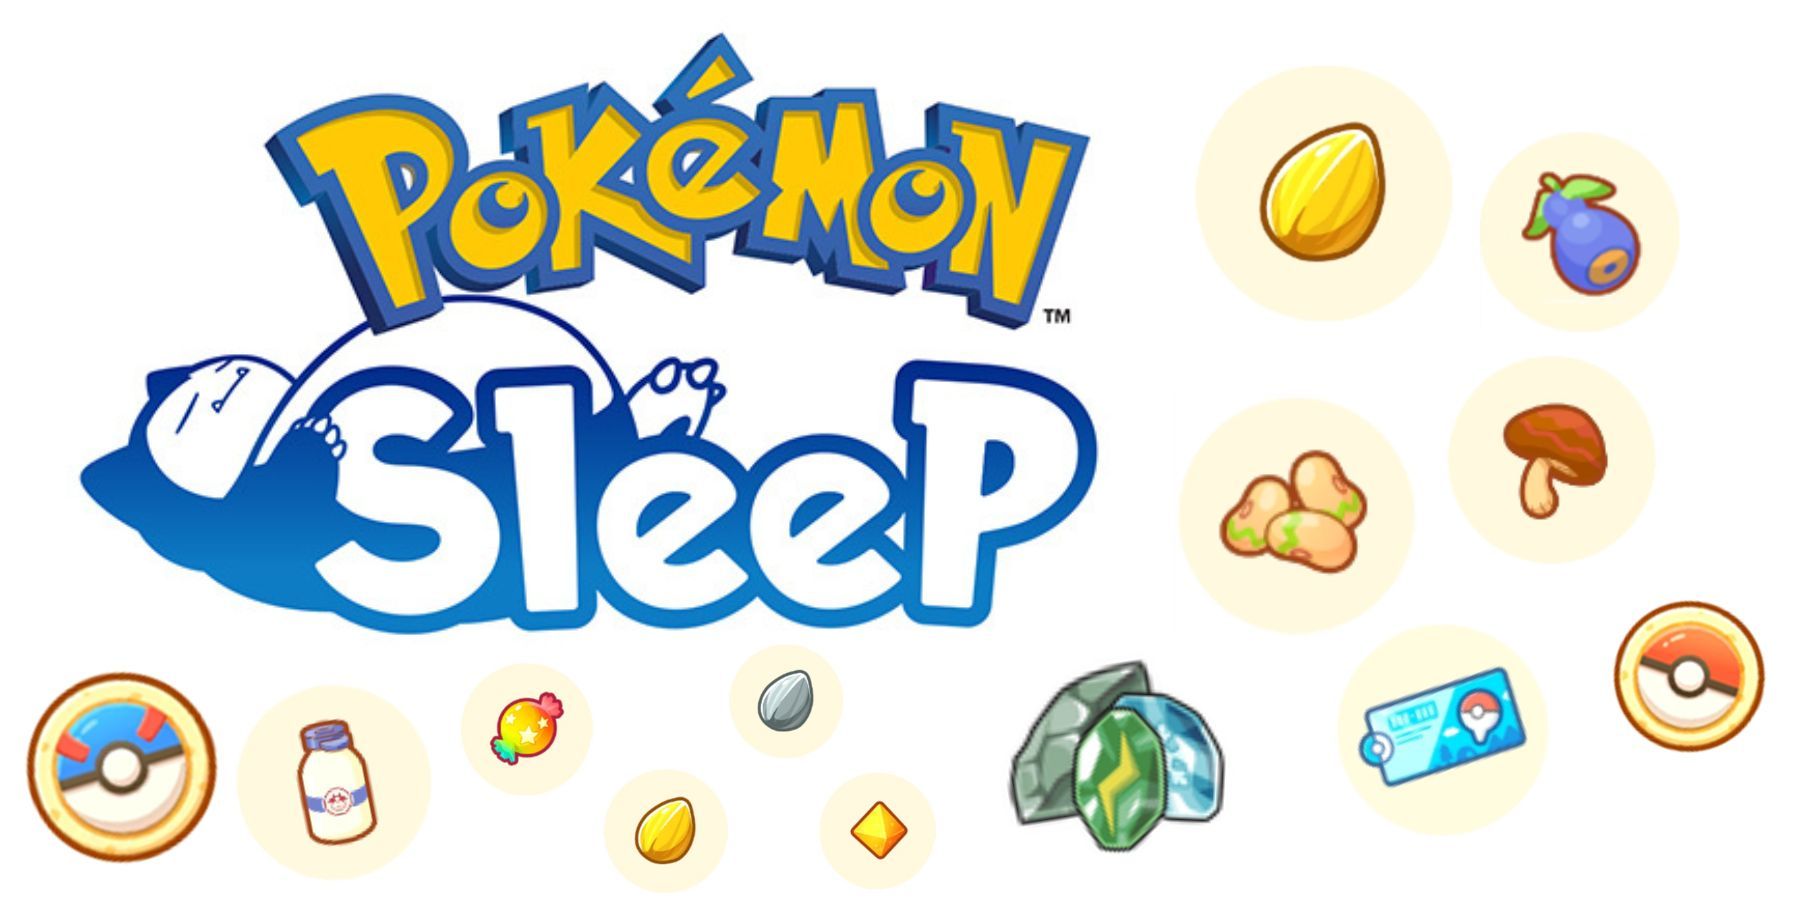 Pokemon Sleep All Items List and How to Get Them